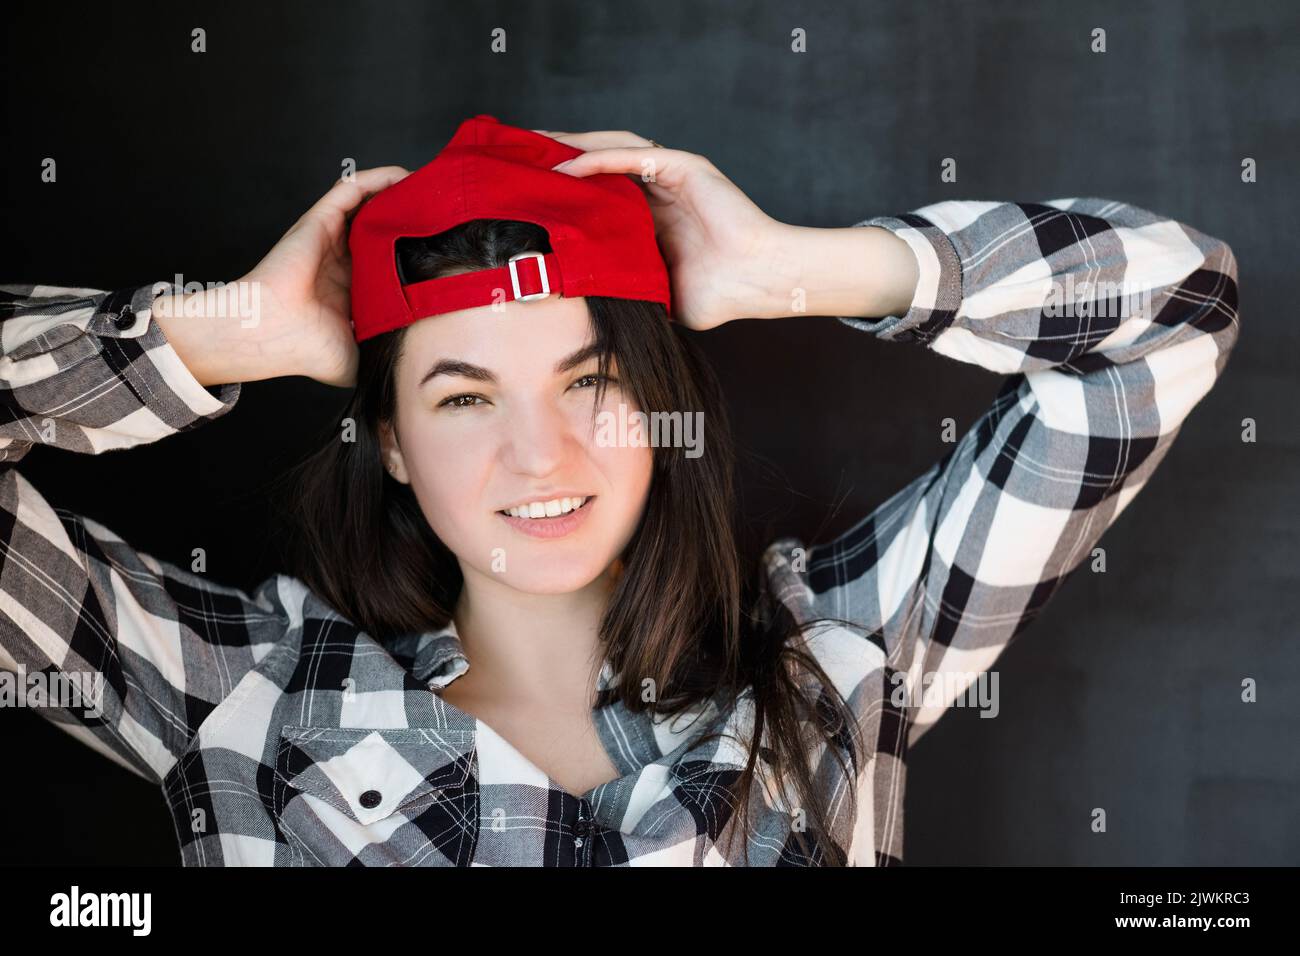 young woman carefree millennial relaxed smile red Stock Photo